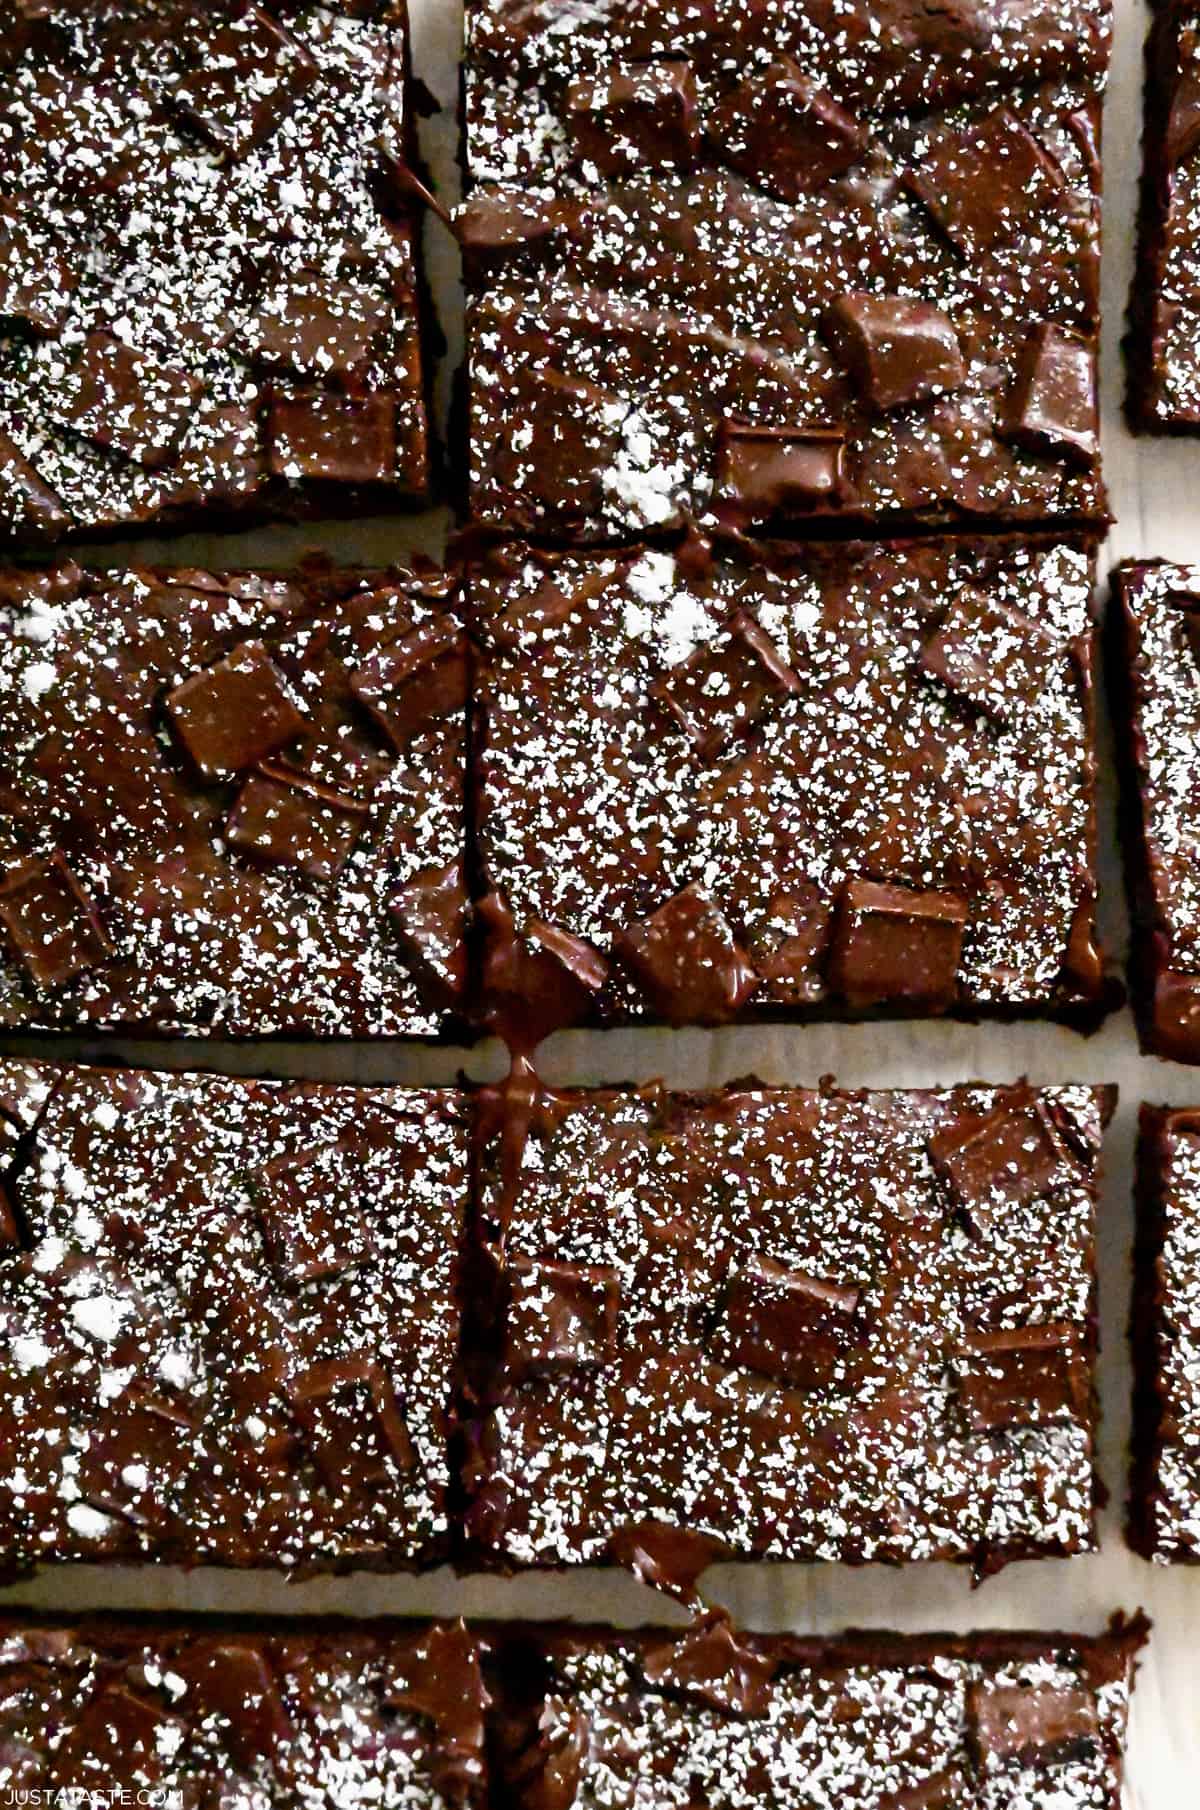 Brownies cut into perfect rectangles and dusted with powdered sugar.